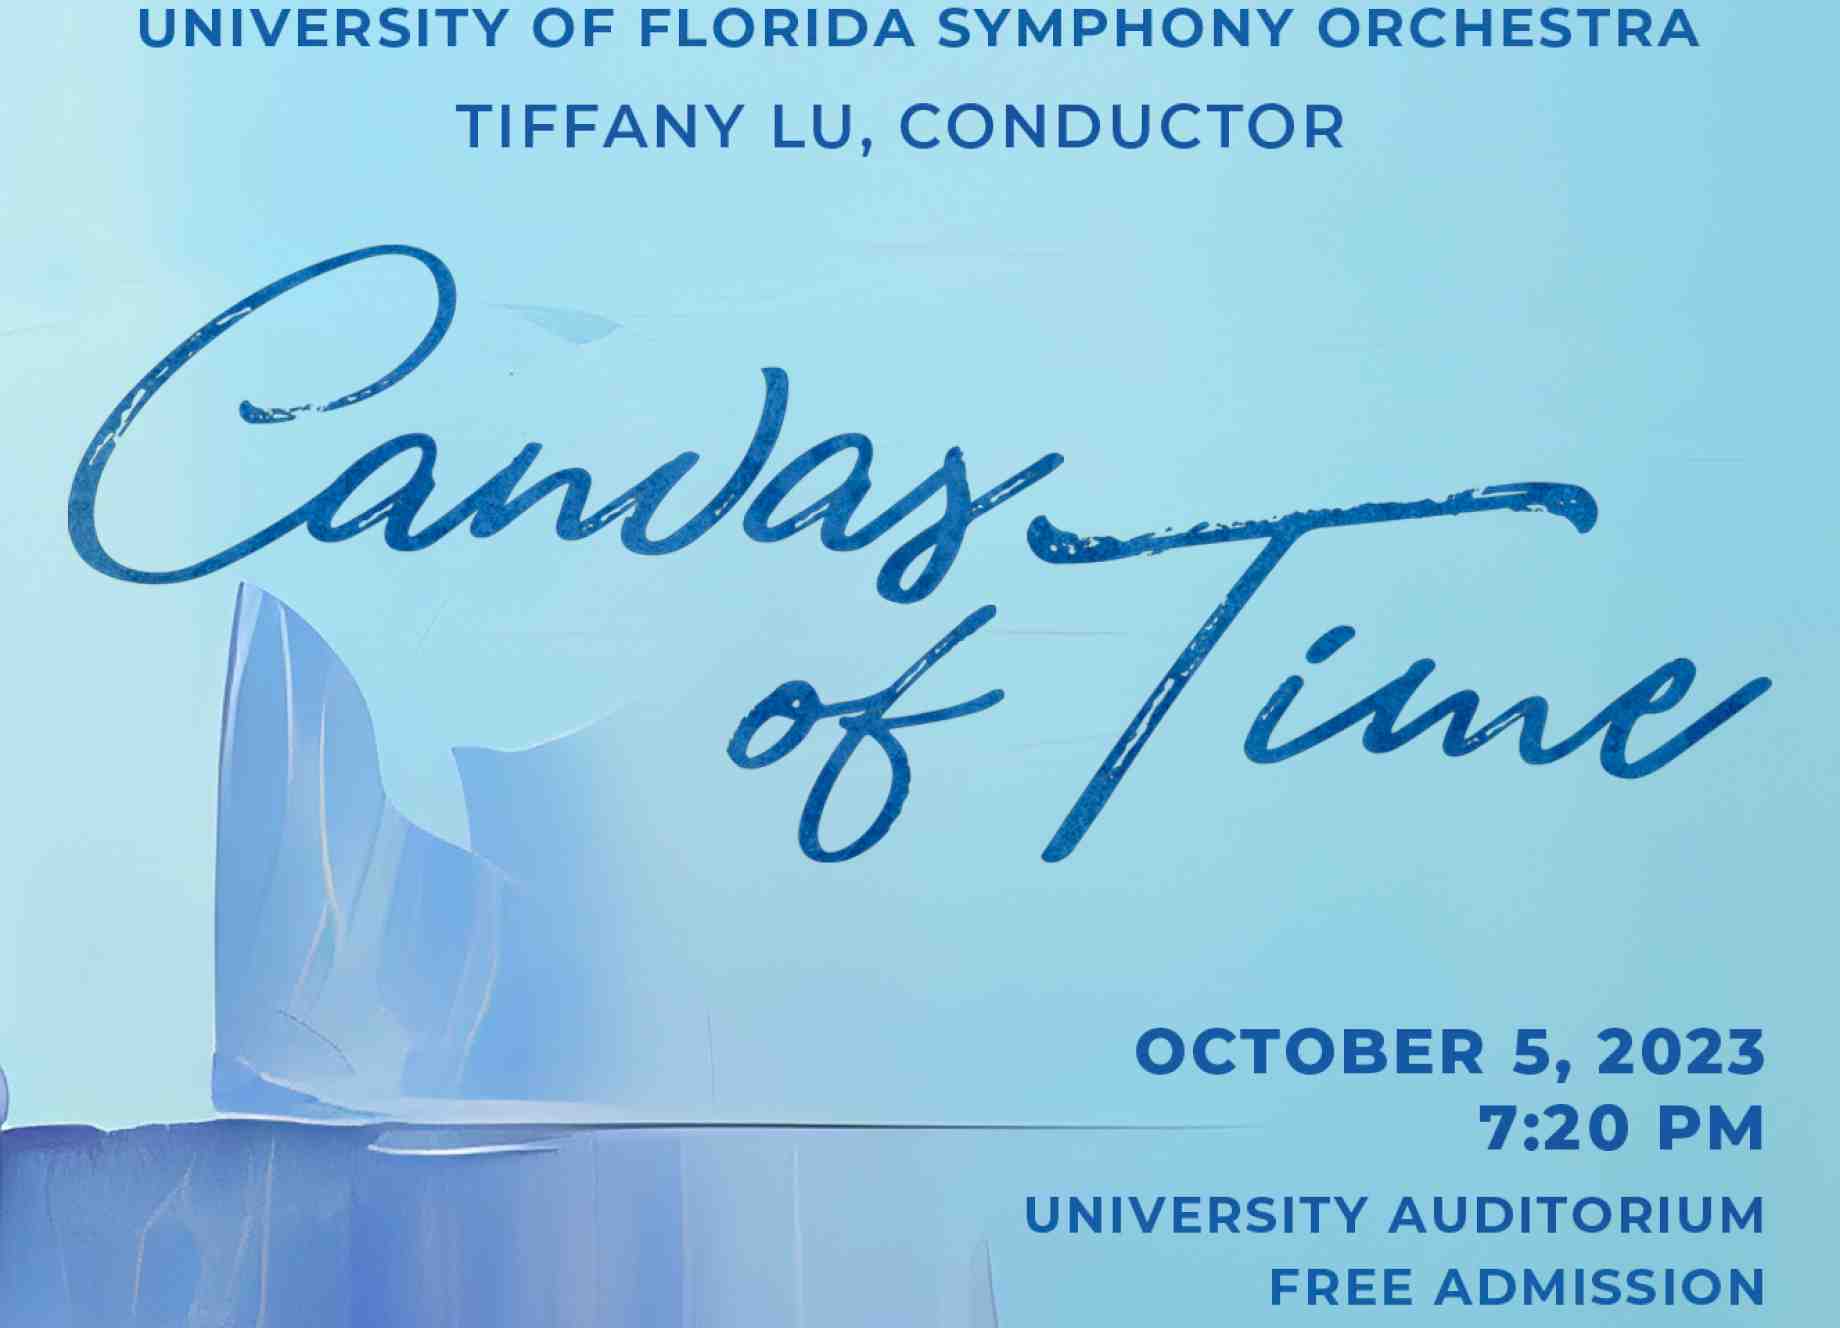 UF Symphony Orchestra "Canvas of Time"